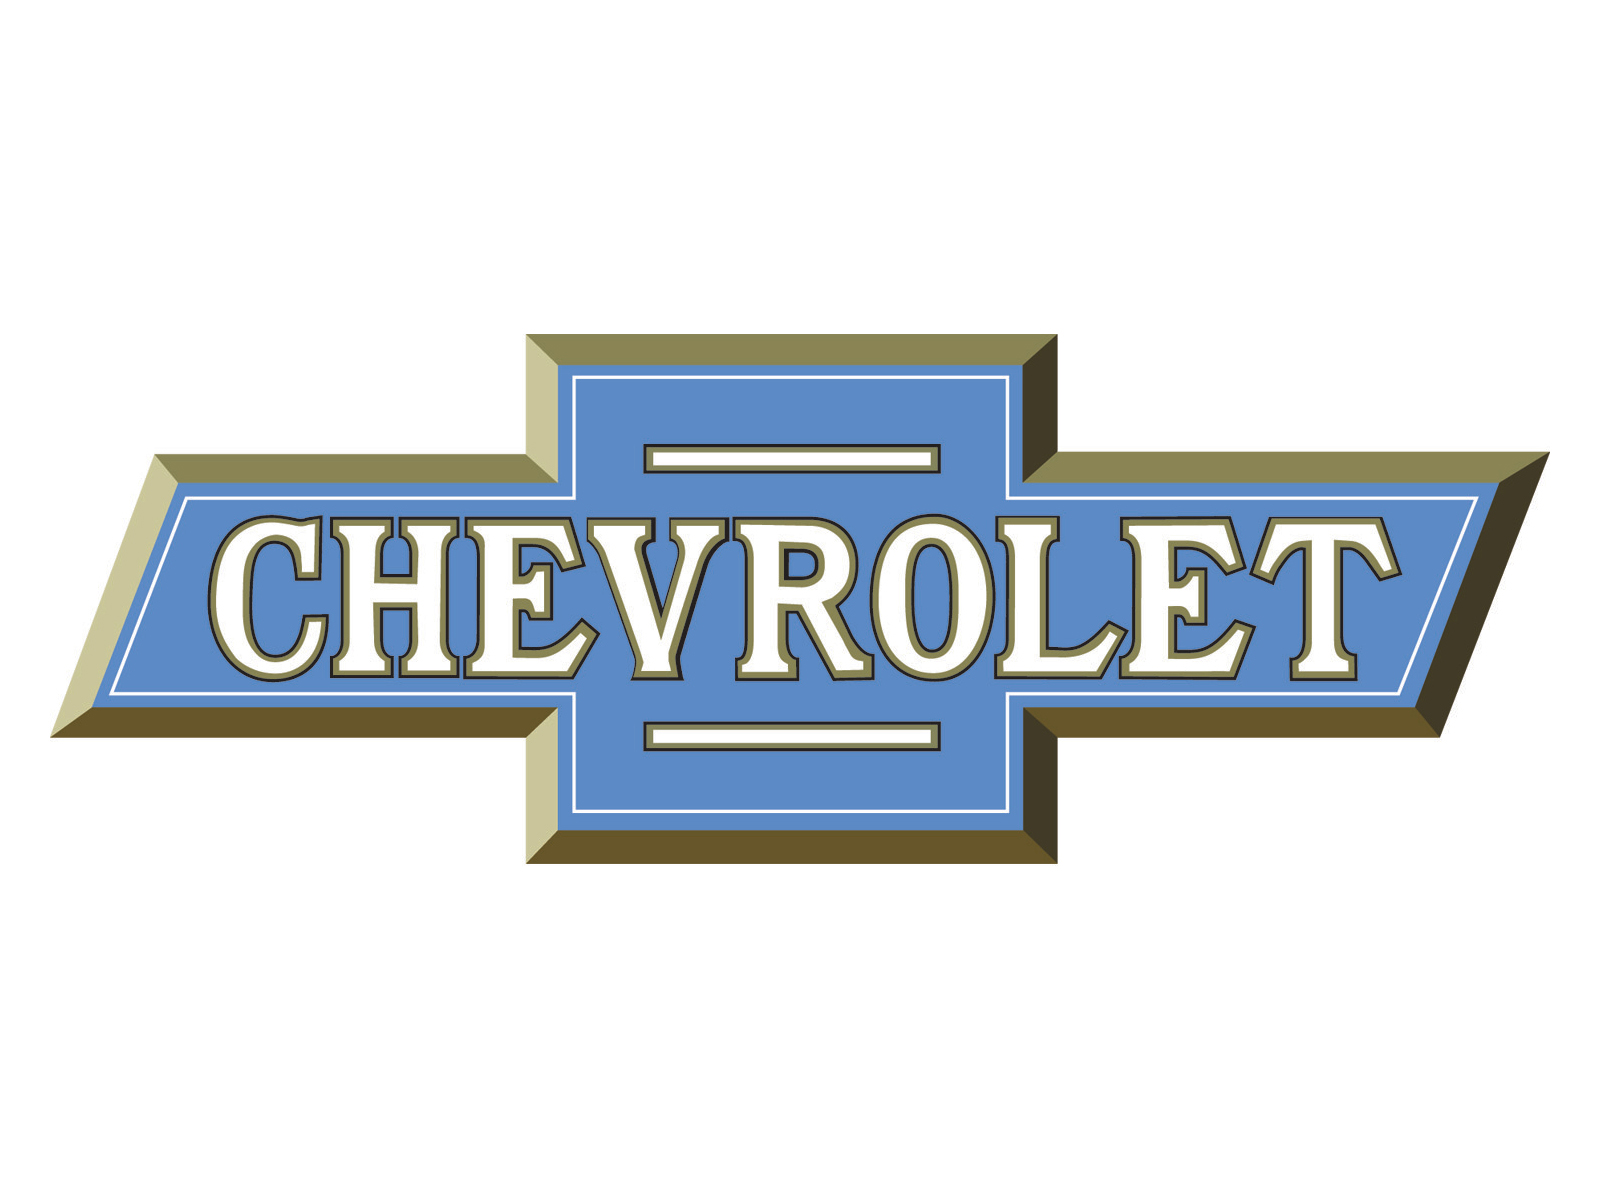 Chevy Logo, Chevrolet Car Symbol Meaning and History.